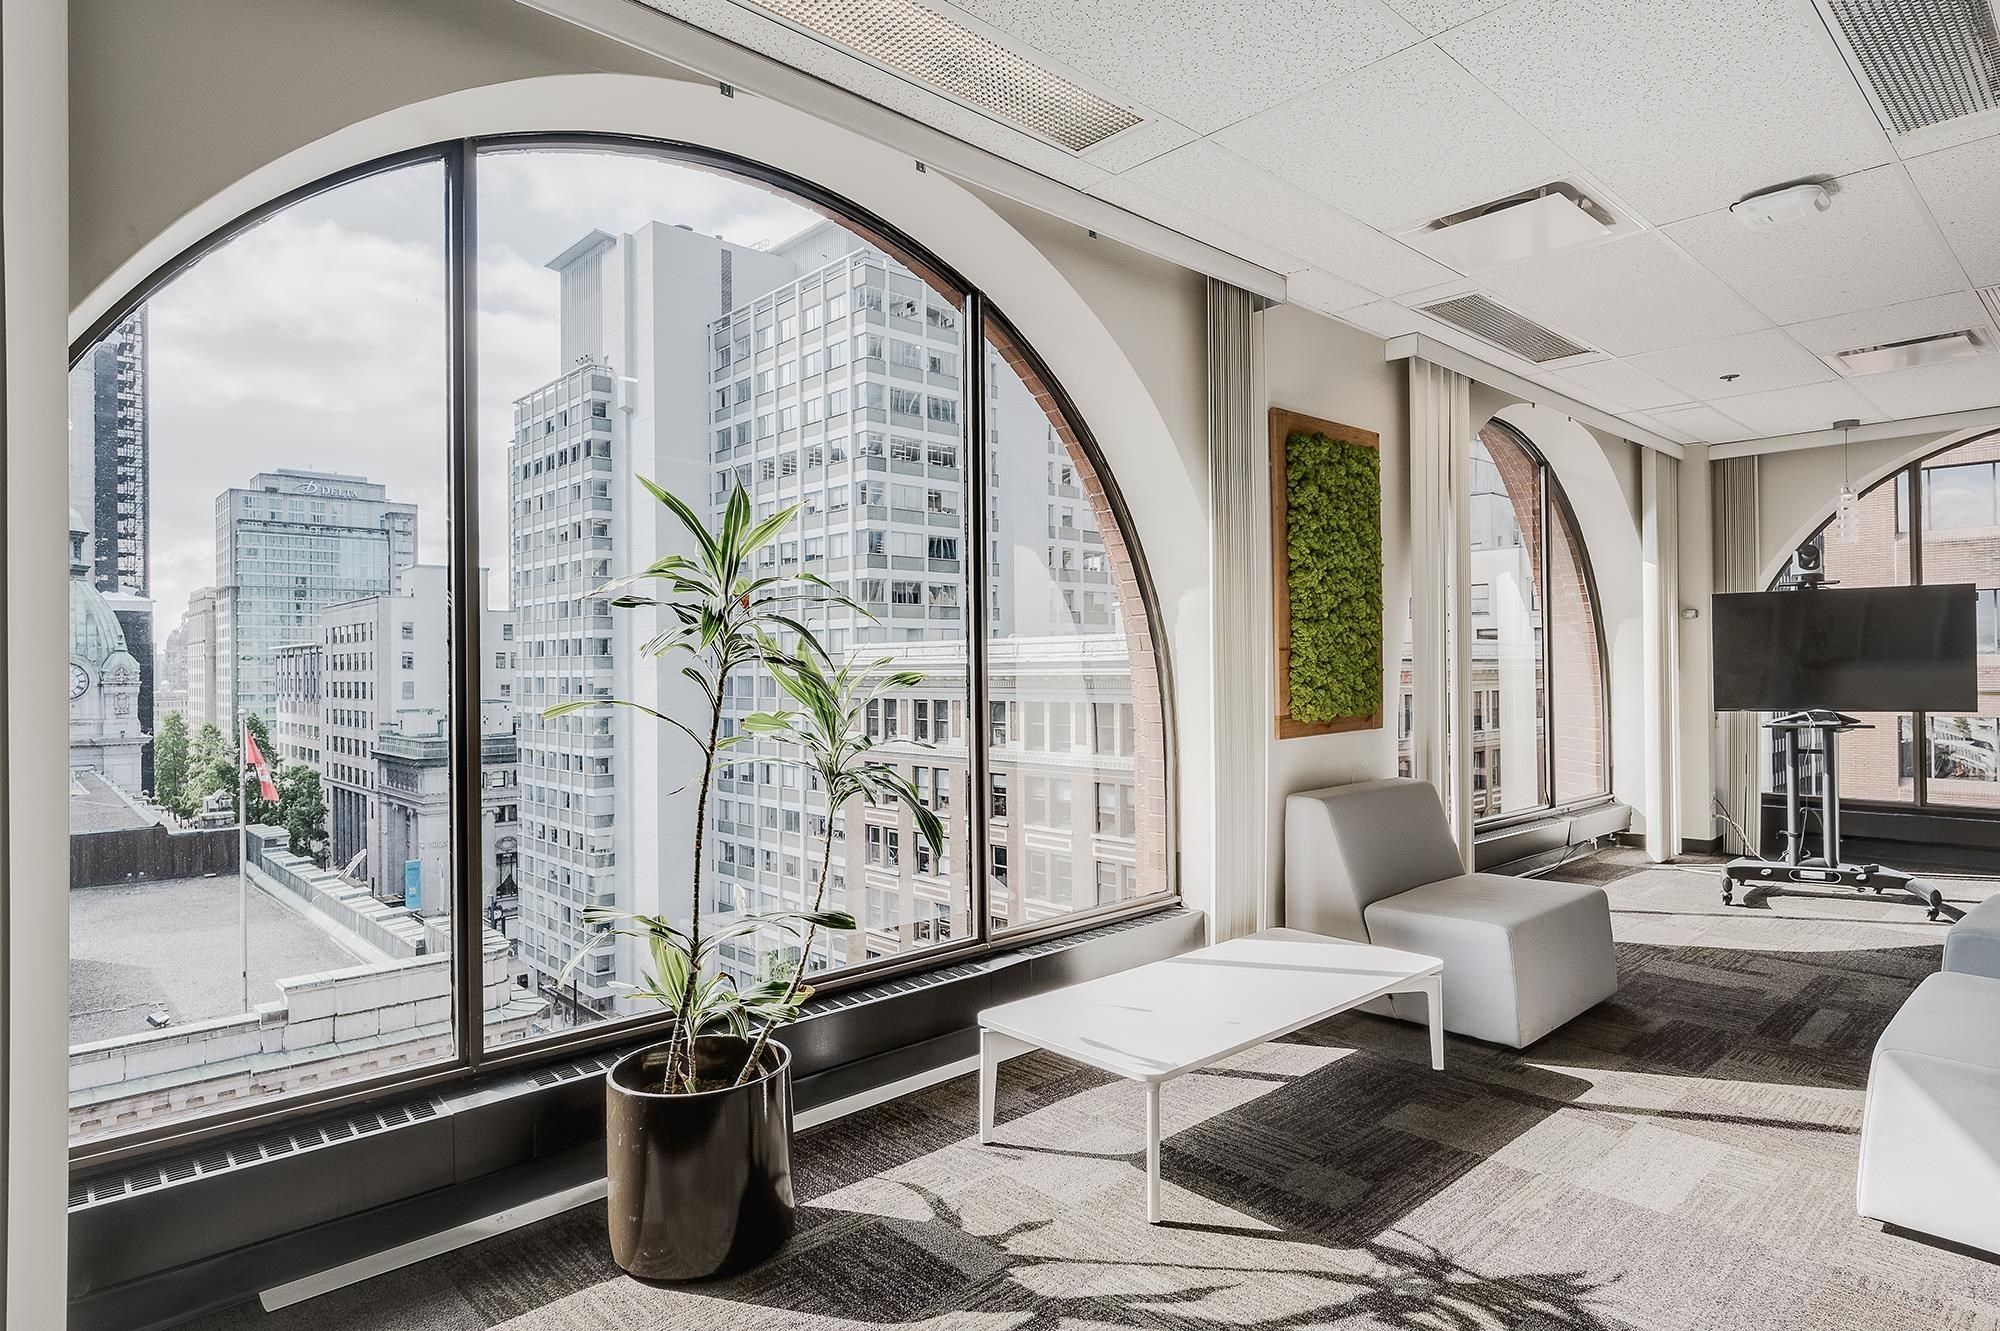 Main Photo: 900 815 W HASTINGS Street in Vancouver: Downtown VW Office for lease (Vancouver West)  : MLS®# C8047998